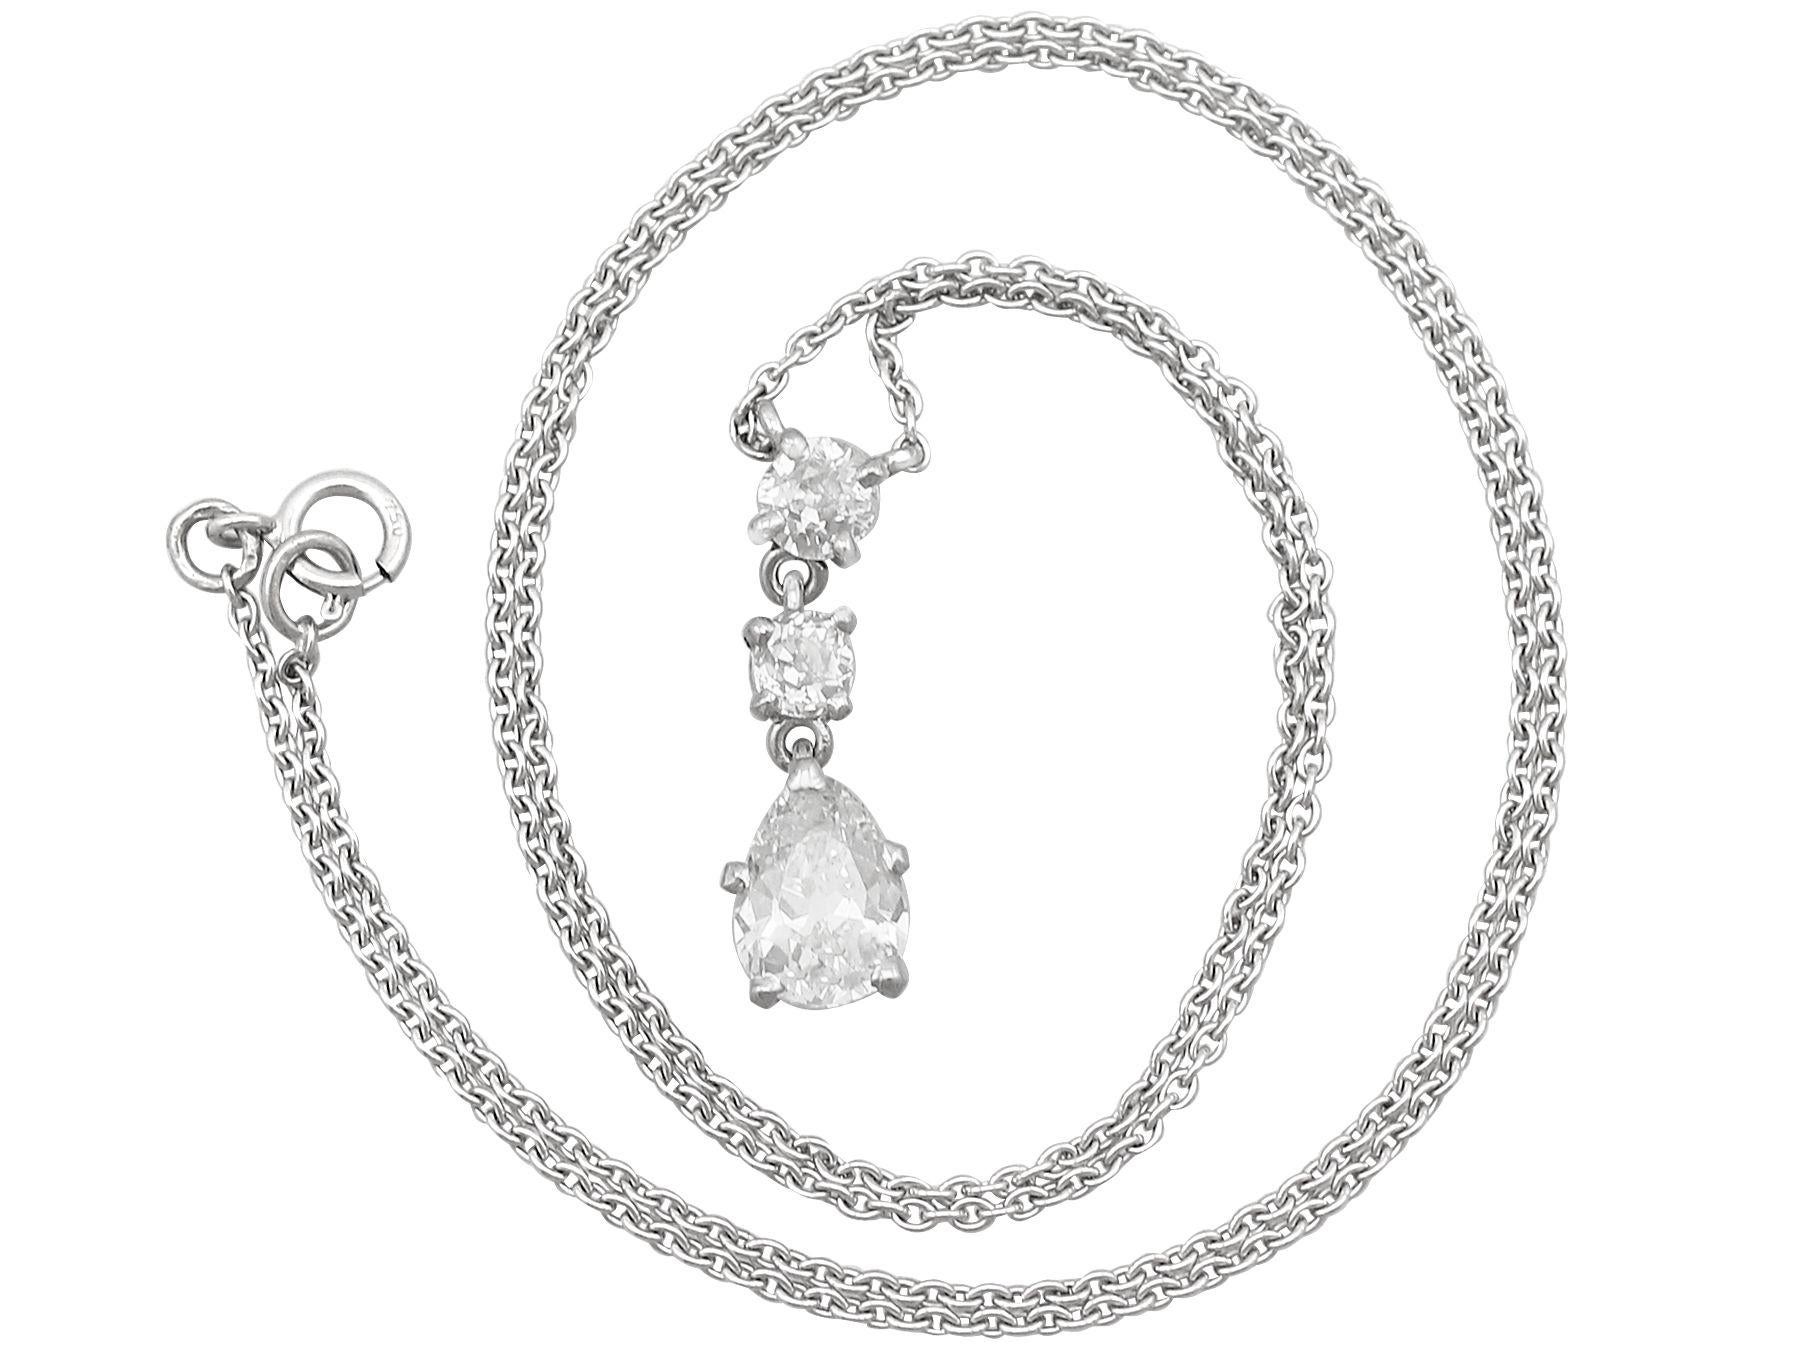 An impressive antique 1.42 carat diamond and 18 karat white gold drop pendant; part of our diverse antique jewelry and estate jewelry collections.

This fine and impressive pear cut diamond necklace has been crafted in 18k white gold.

The pendant